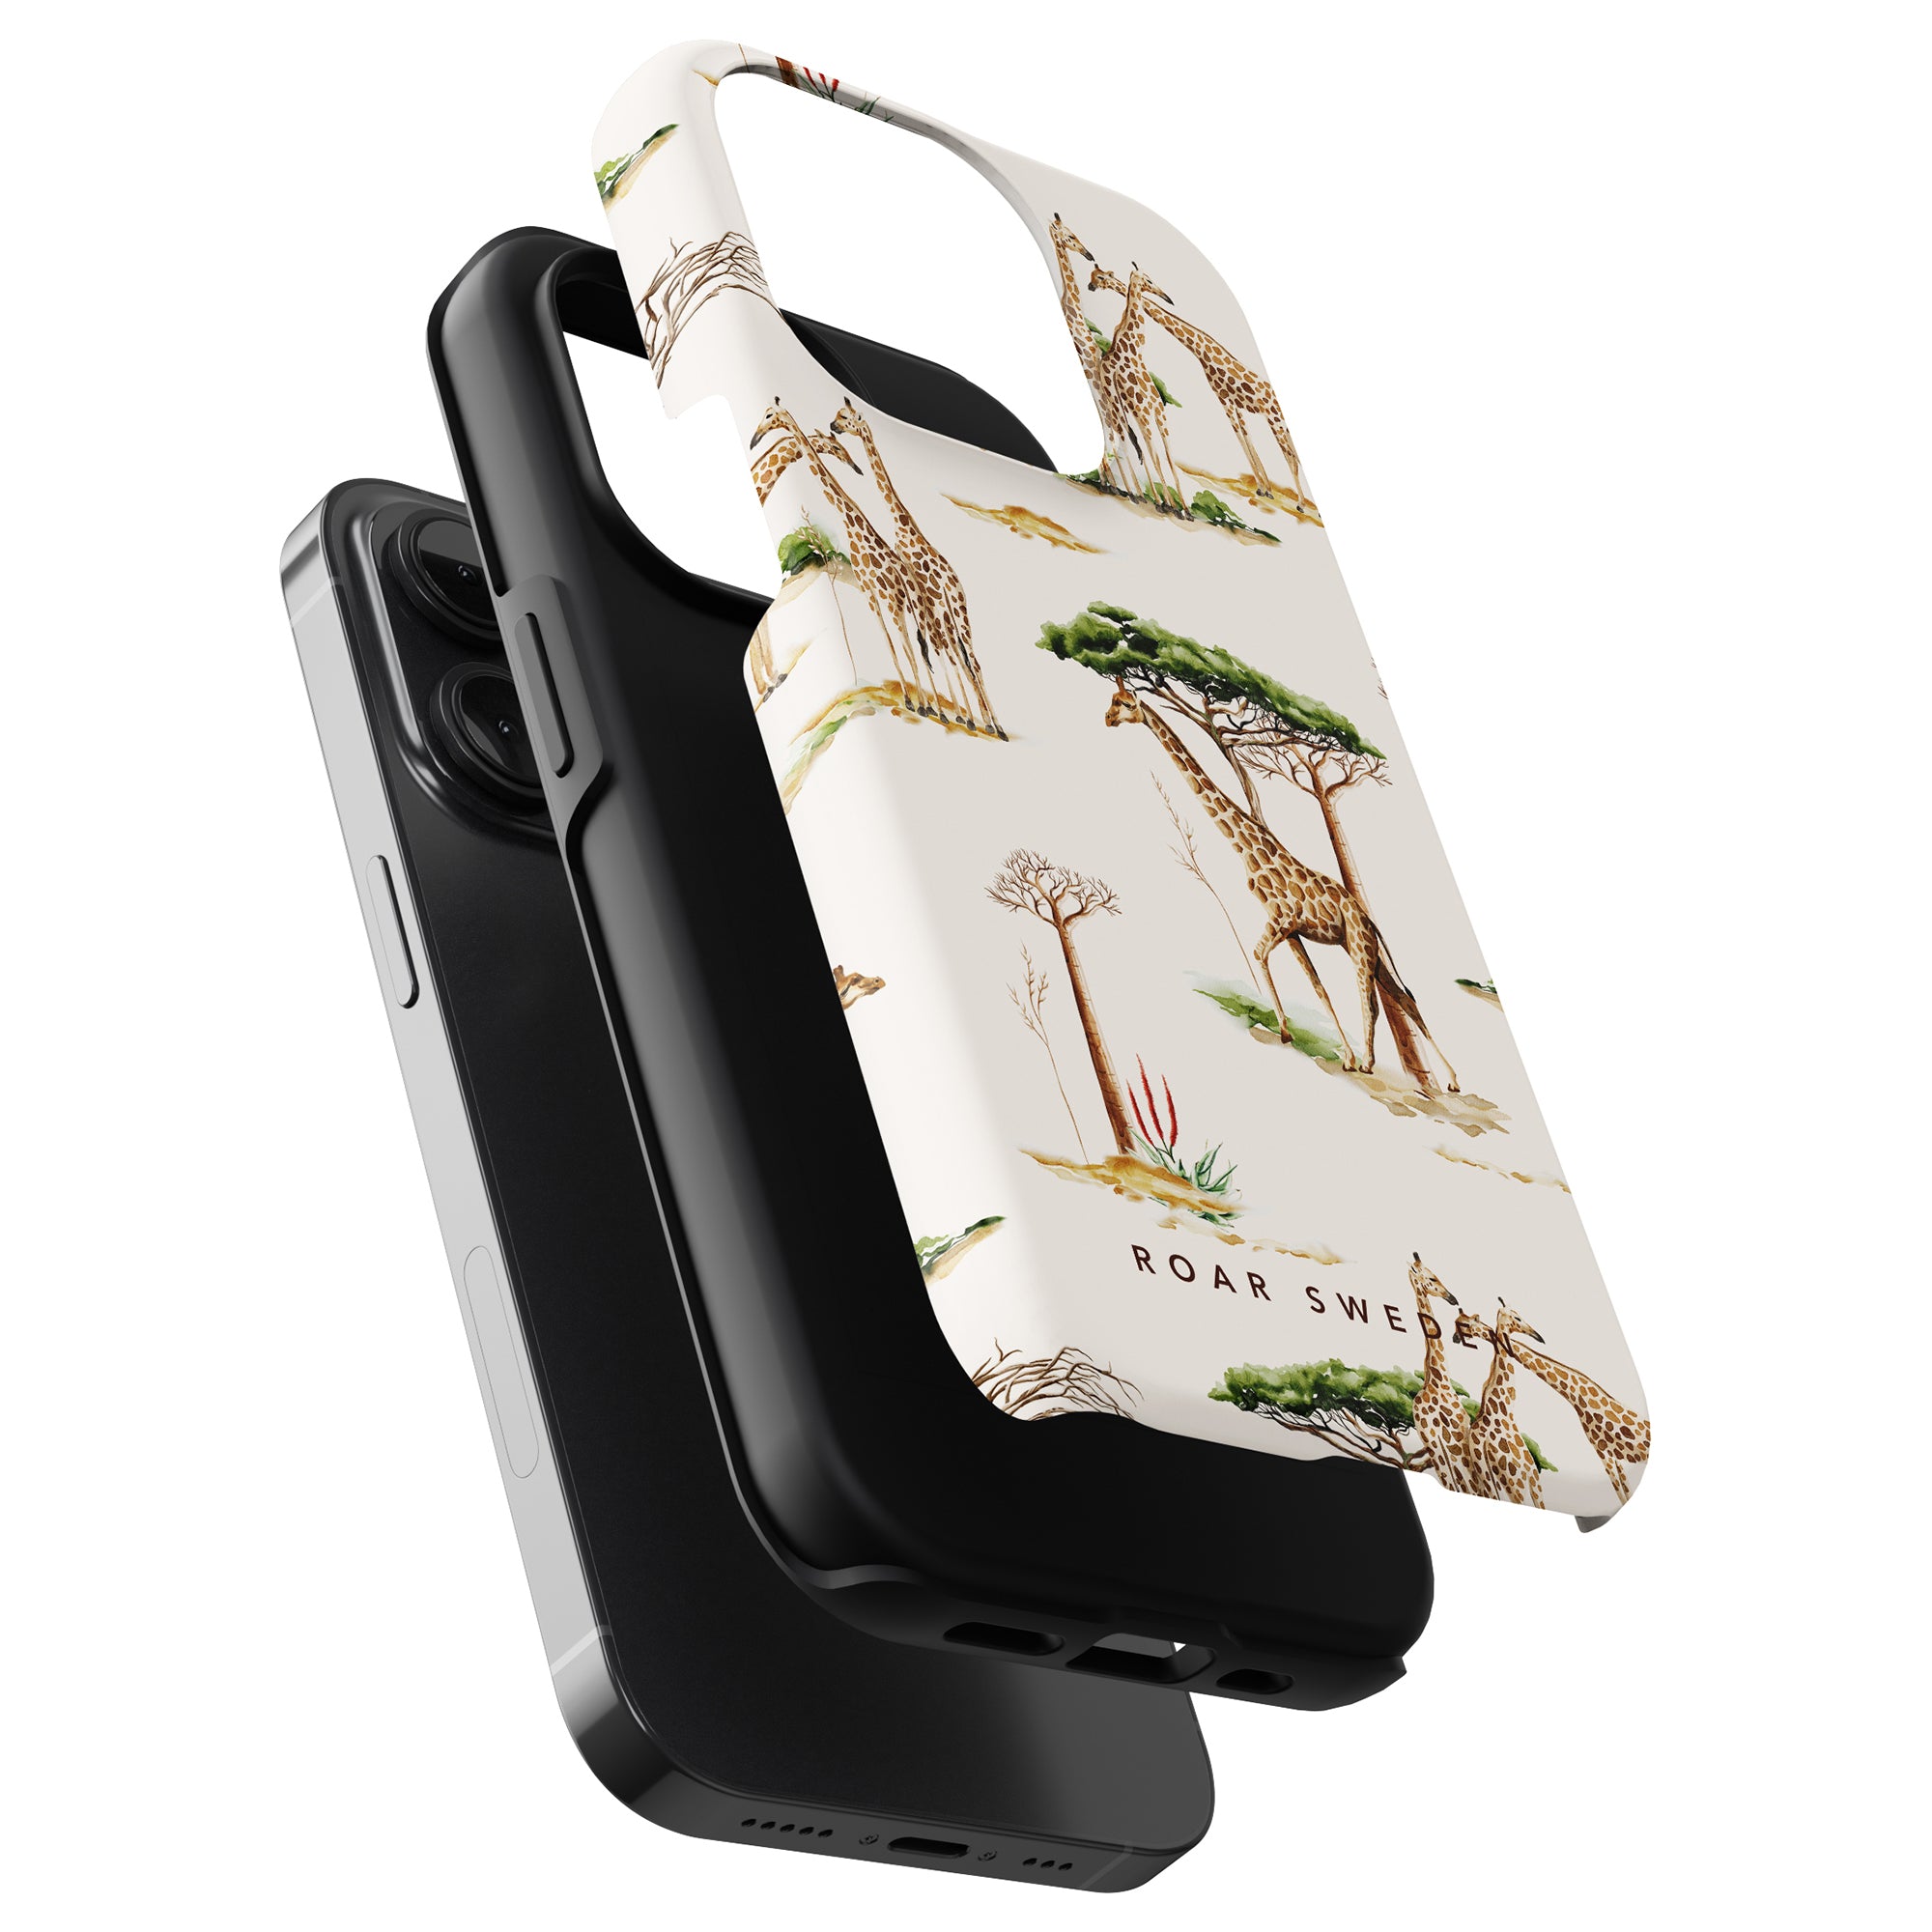 Three smartphone cases are stacked, one with a giraffe pattern from the Safari Collection, one solid black, and the other solid gray. The patterned case shows giraffes next to acacia trees with "ROAR SWE" written on it. Perfect Giraffa - Tough Case for those who love a wild touch in their accessories.